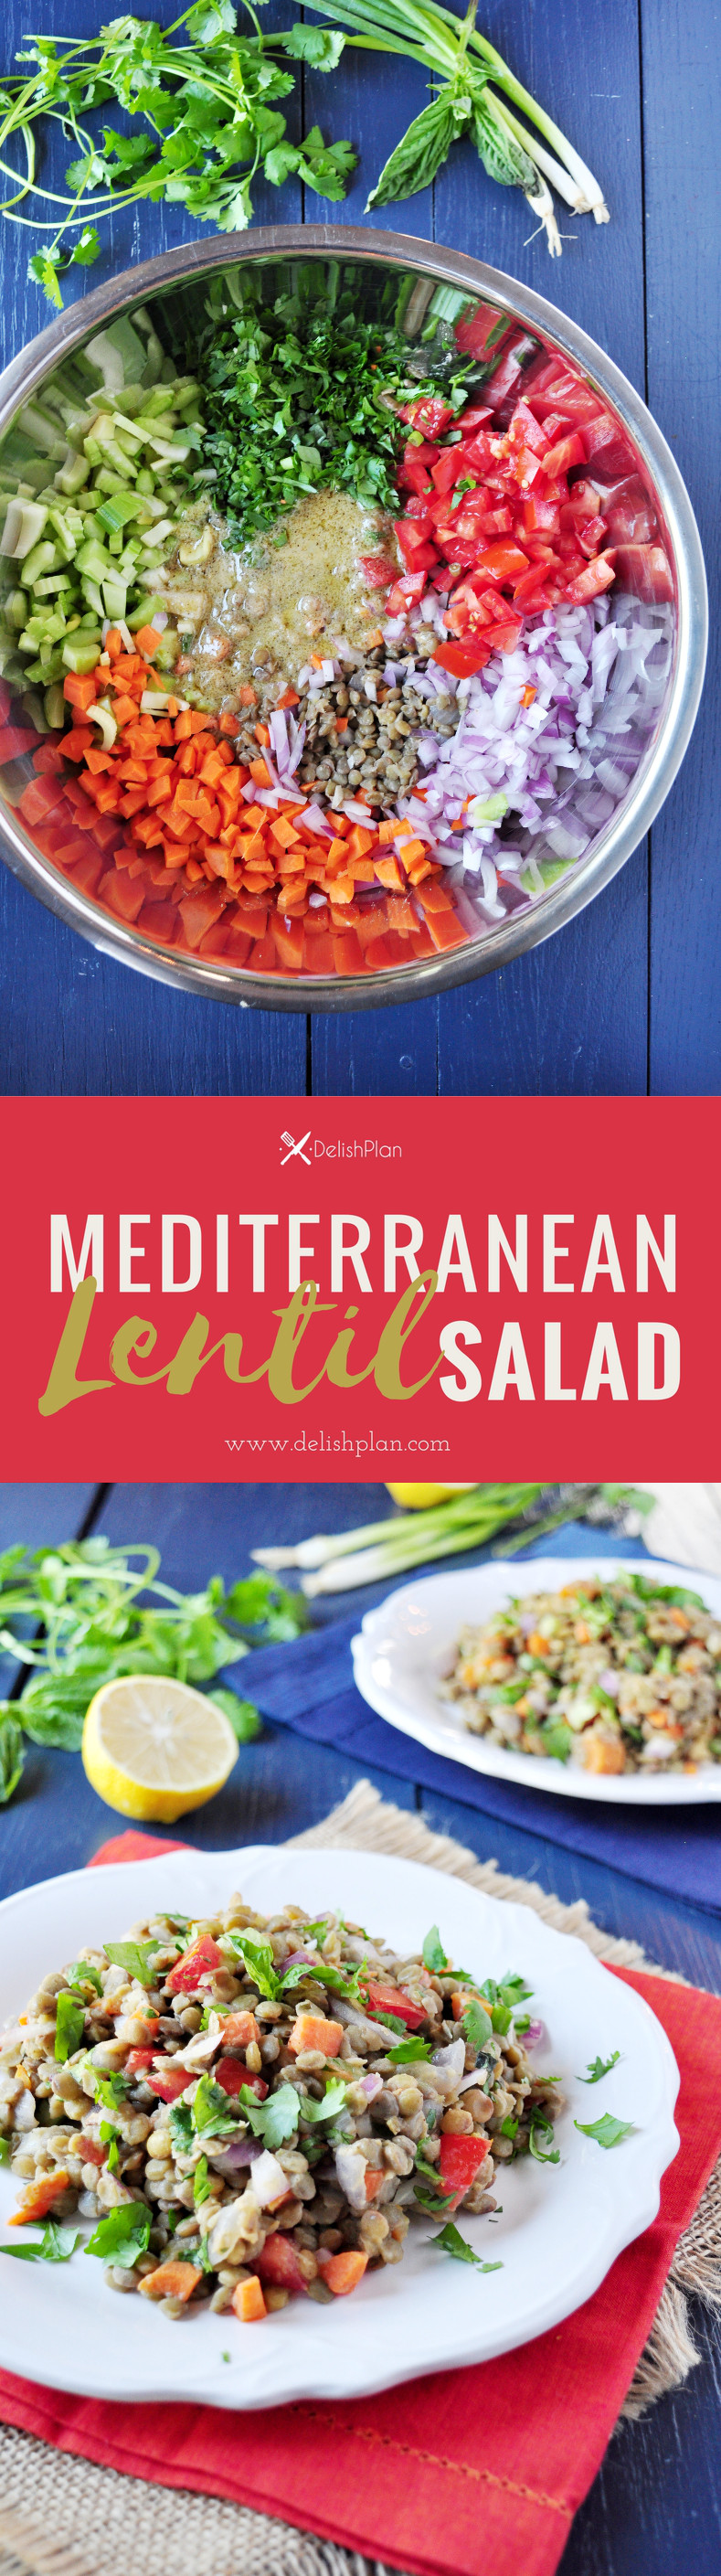 This is a delicious lentil salad that's wonderful when served as a side as well as nutritiously satisfying when served as a main.